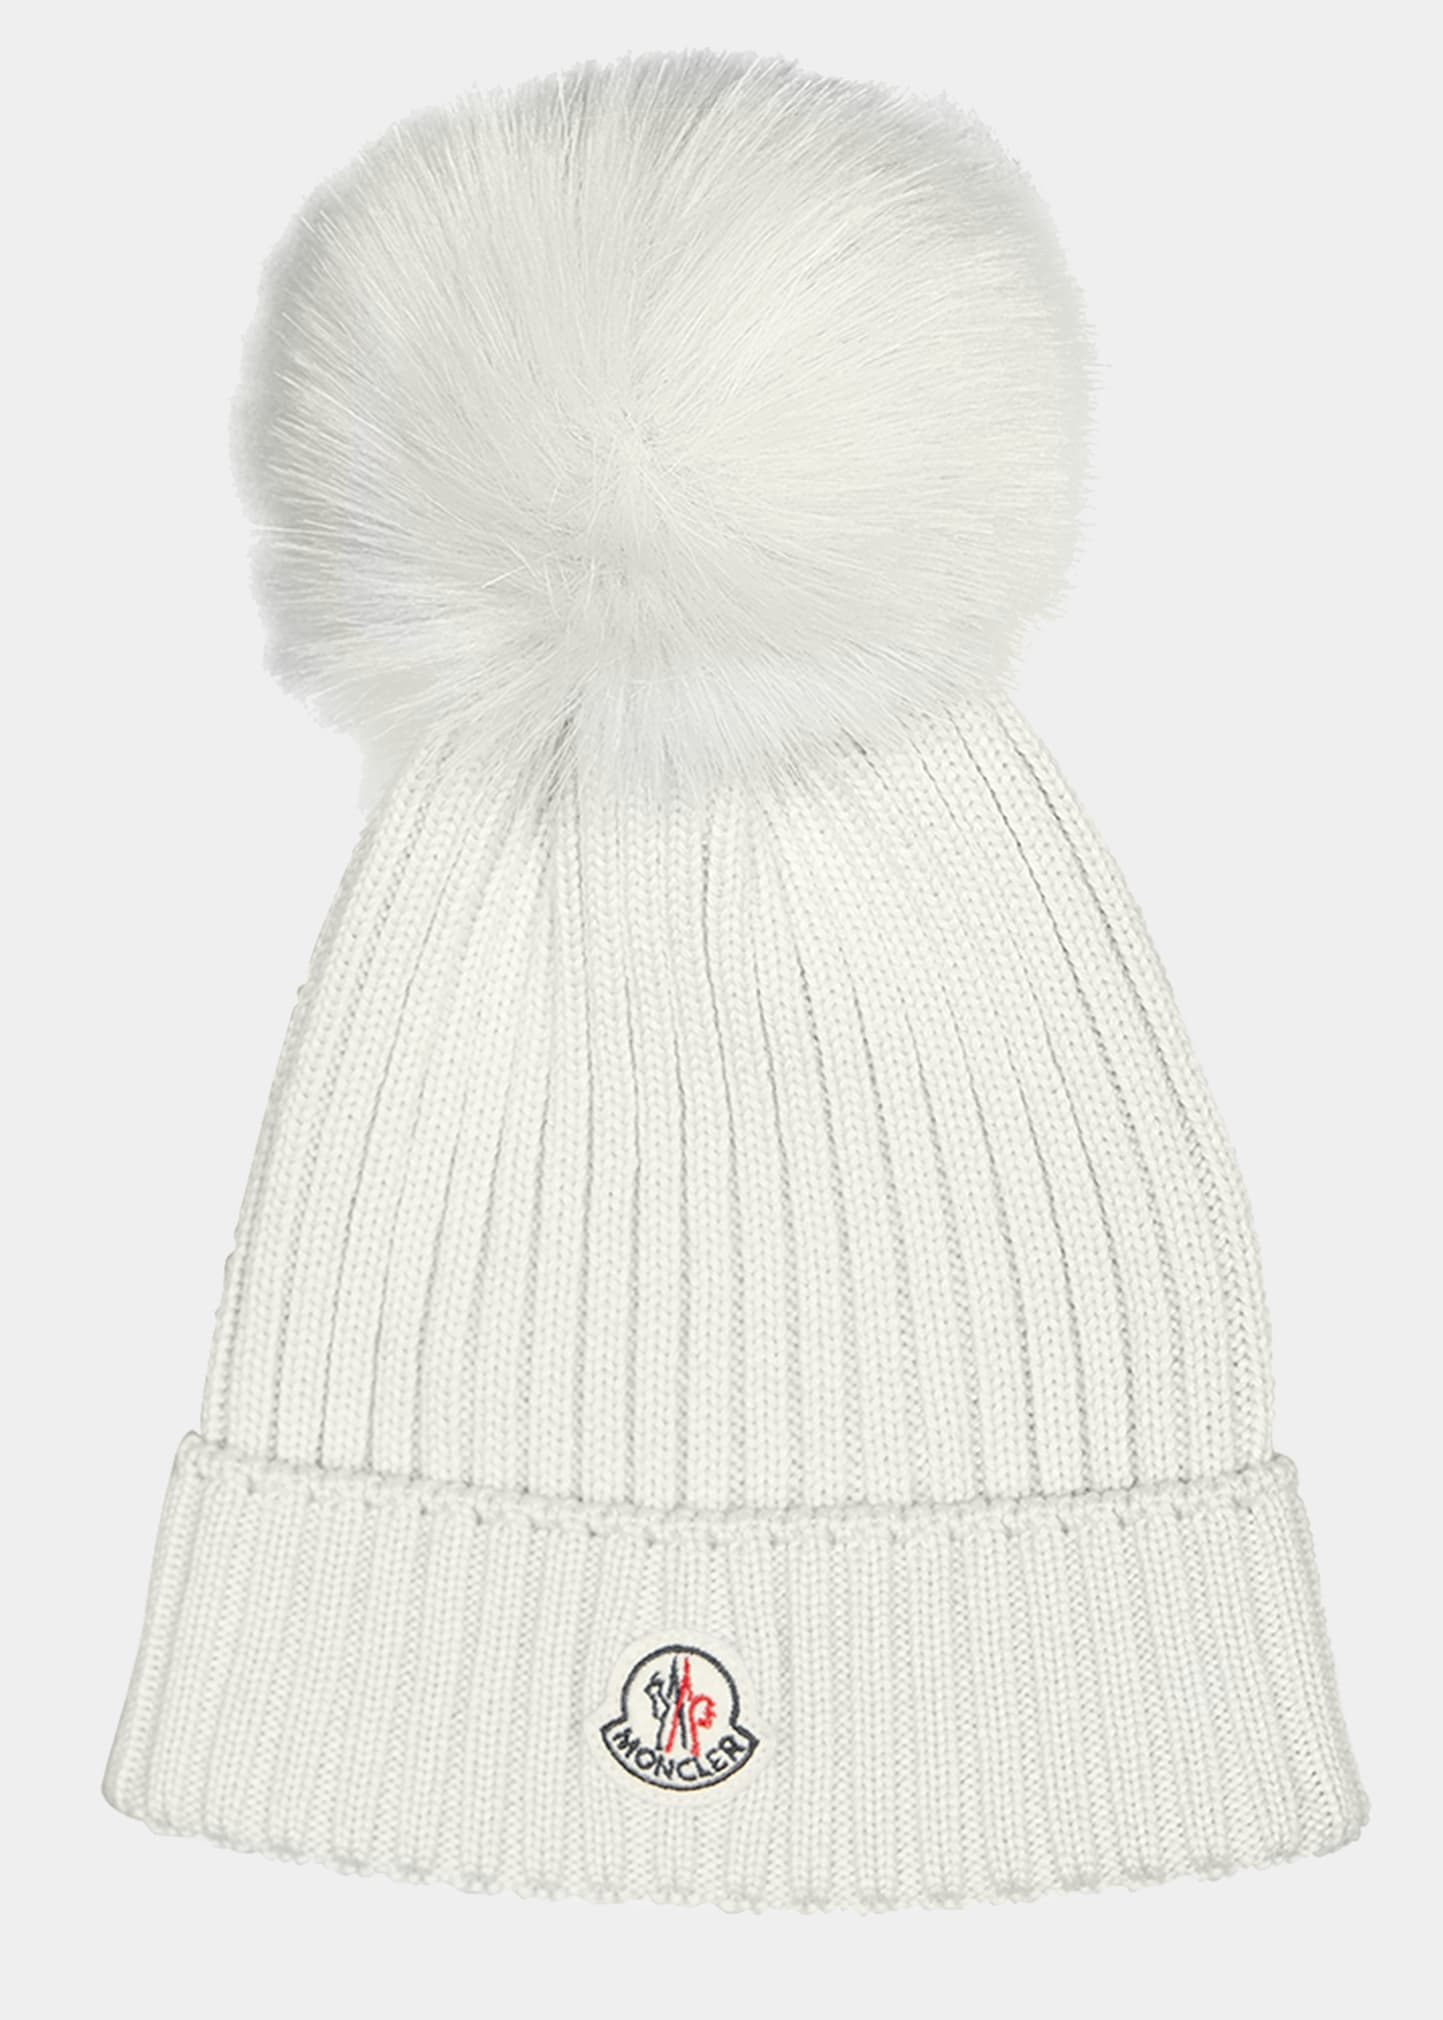 Moncler Kids' Girl's Ribbed Wool Beanie W/ Faux Fur Pompom In Natural